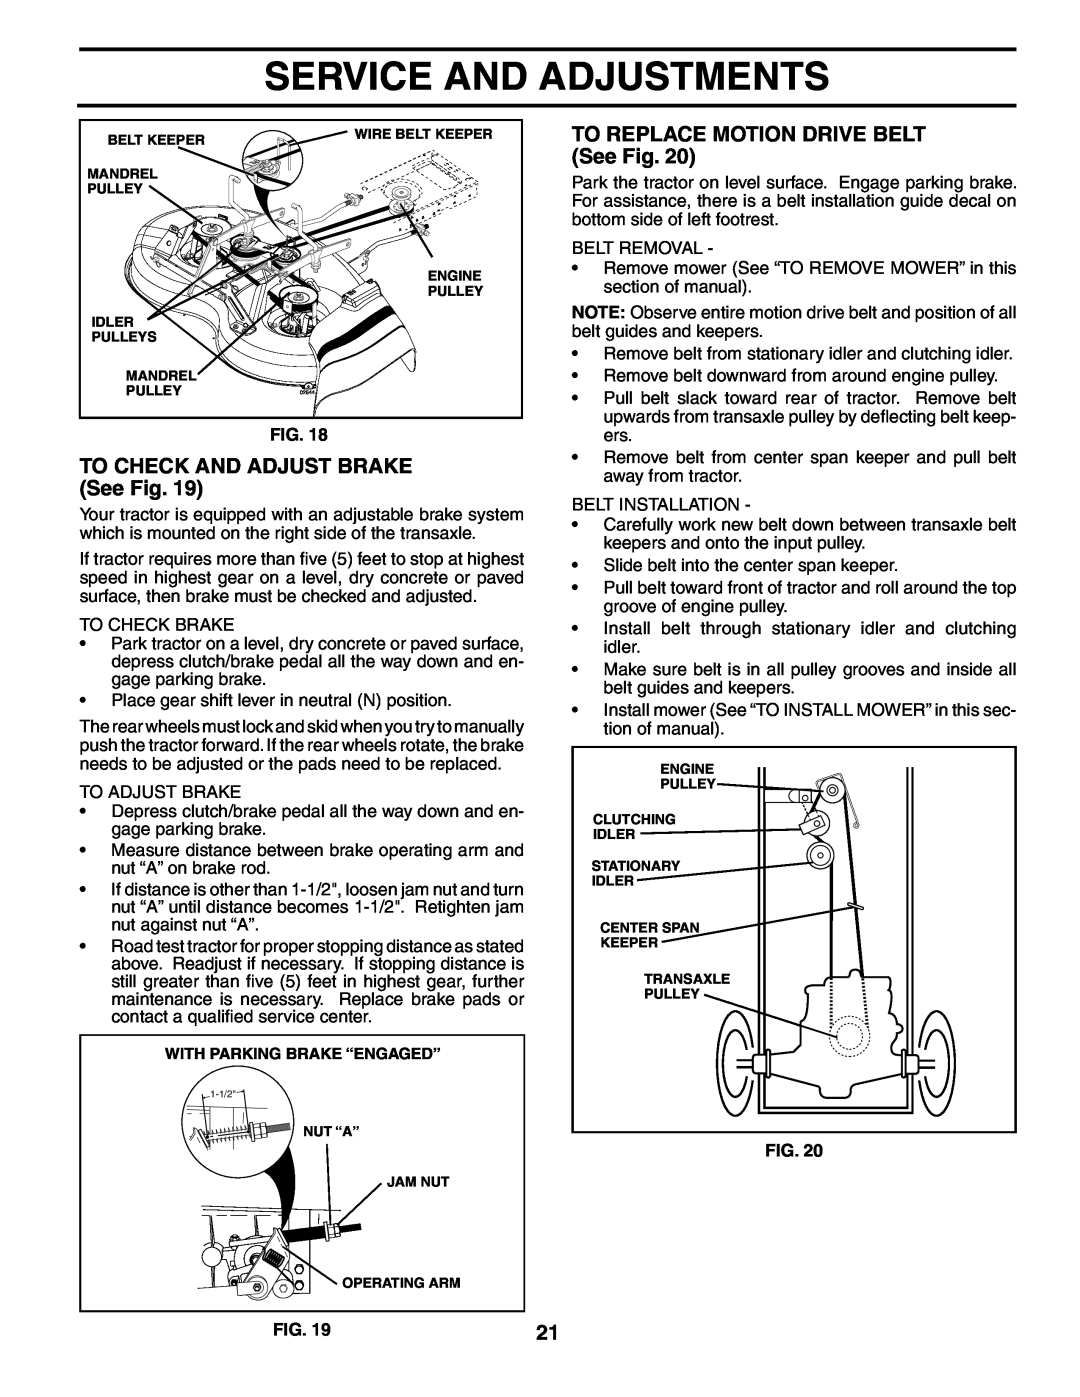 Poulan 401152 manual TO CHECK AND ADJUST BRAKE See Fig, TO REPLACE MOTION DRIVE BELT See Fig, Service And Adjustments 